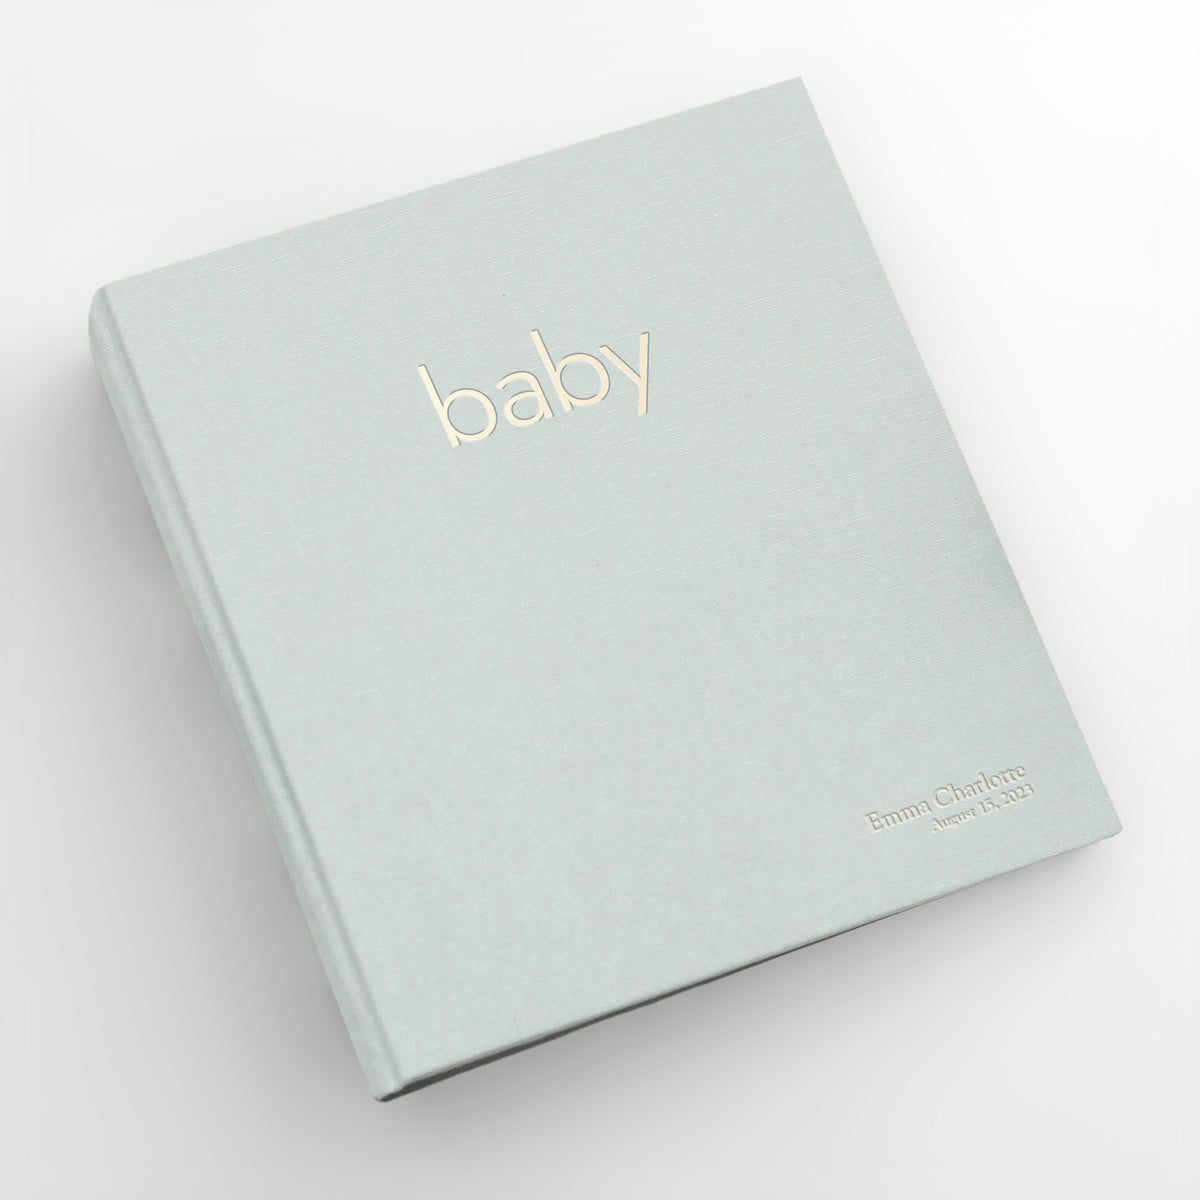 Personalized Baby Memory Binder | Cover: Pastel Blue Cotton | Select Your Own Pages